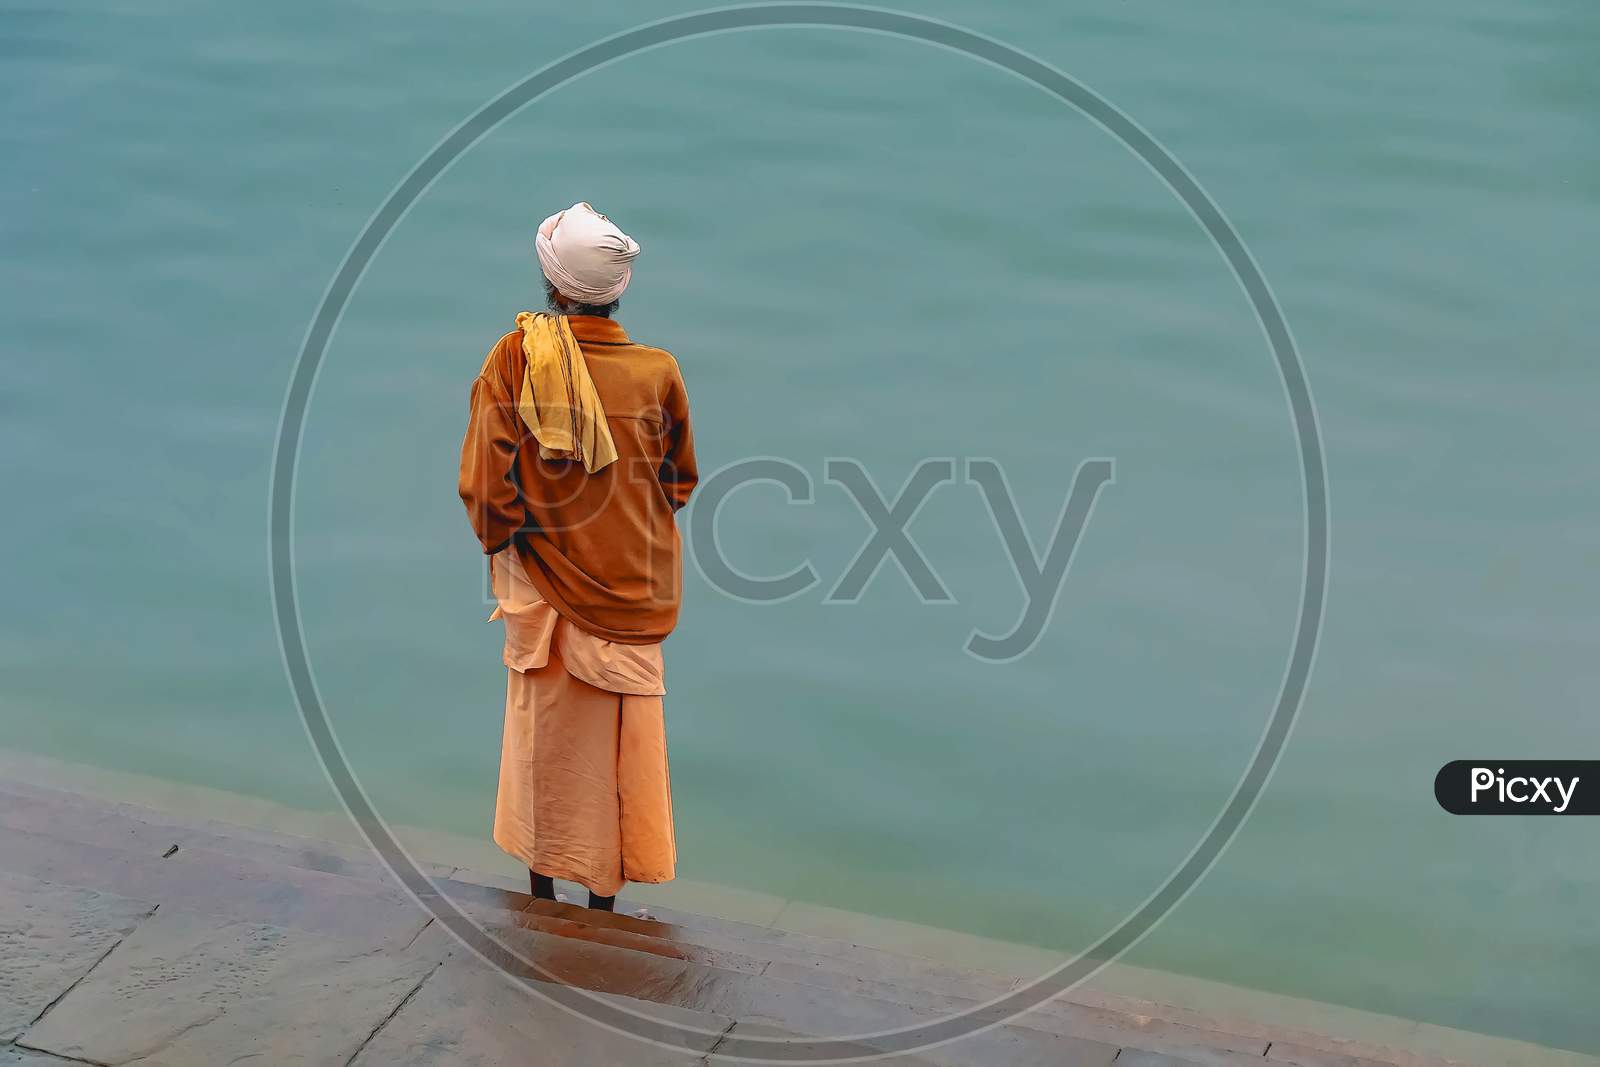 A Sadhu ready to pray on the banks of the holy river Ganges in Varanasi, India